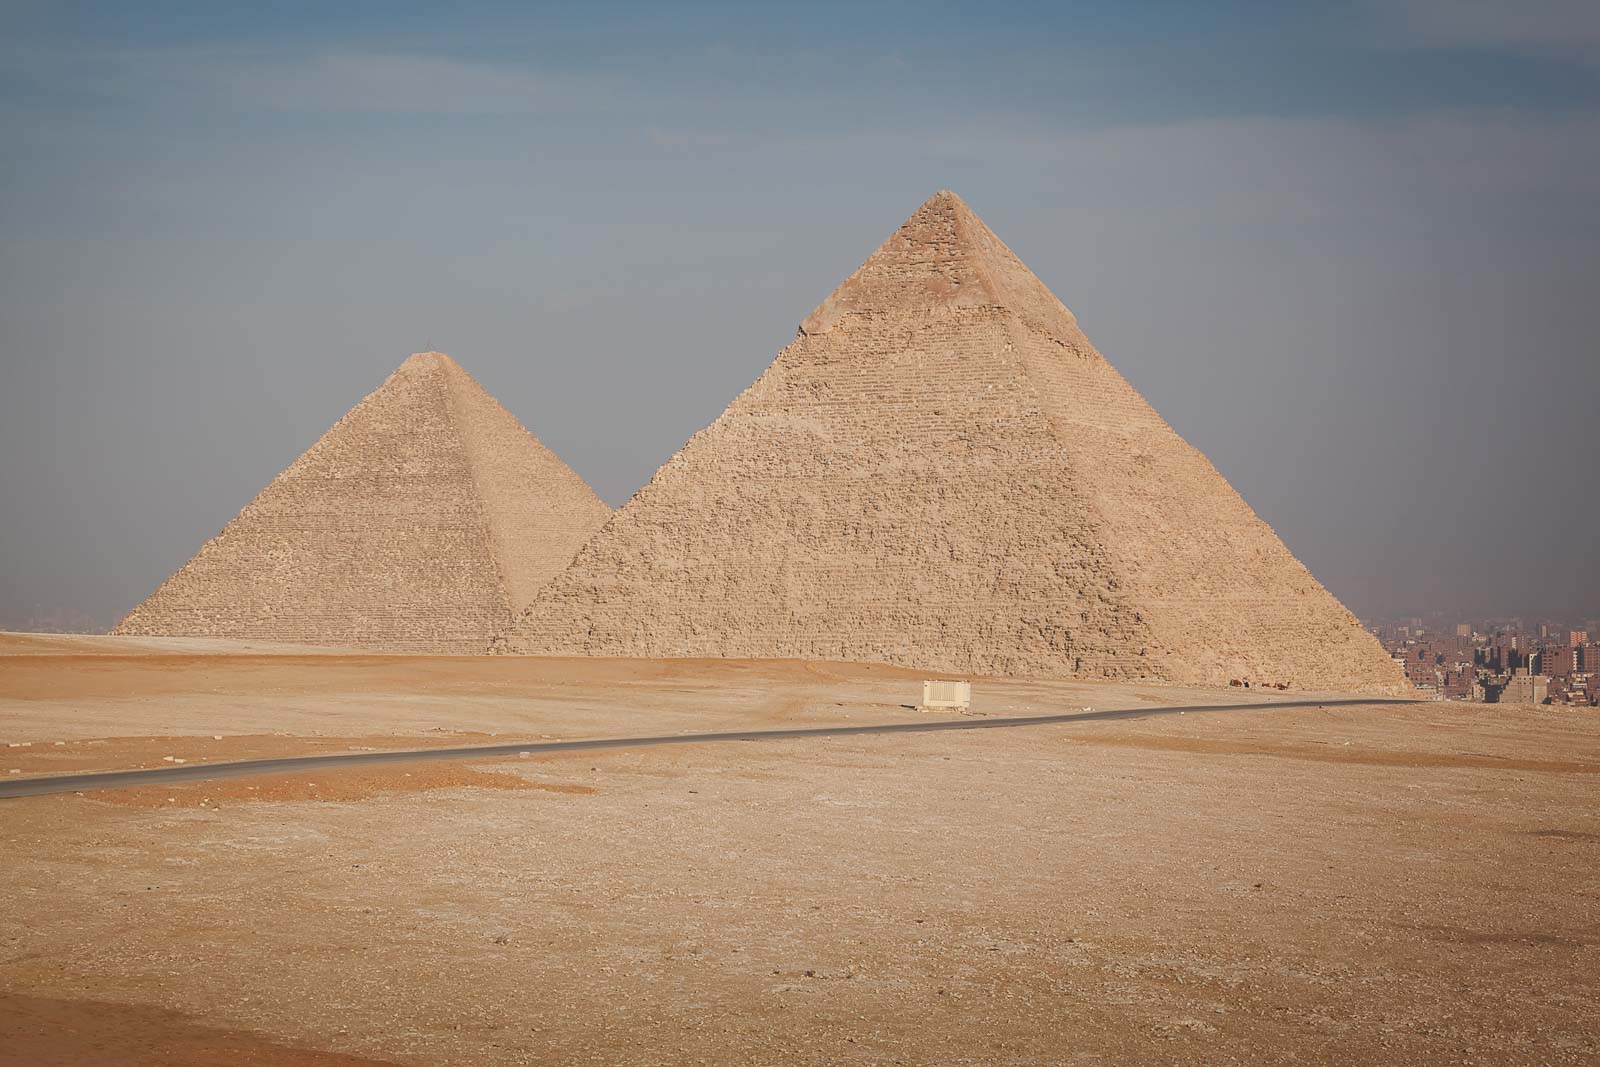 The Pyramids of Giza the only original of the seven wonders of the world still standing